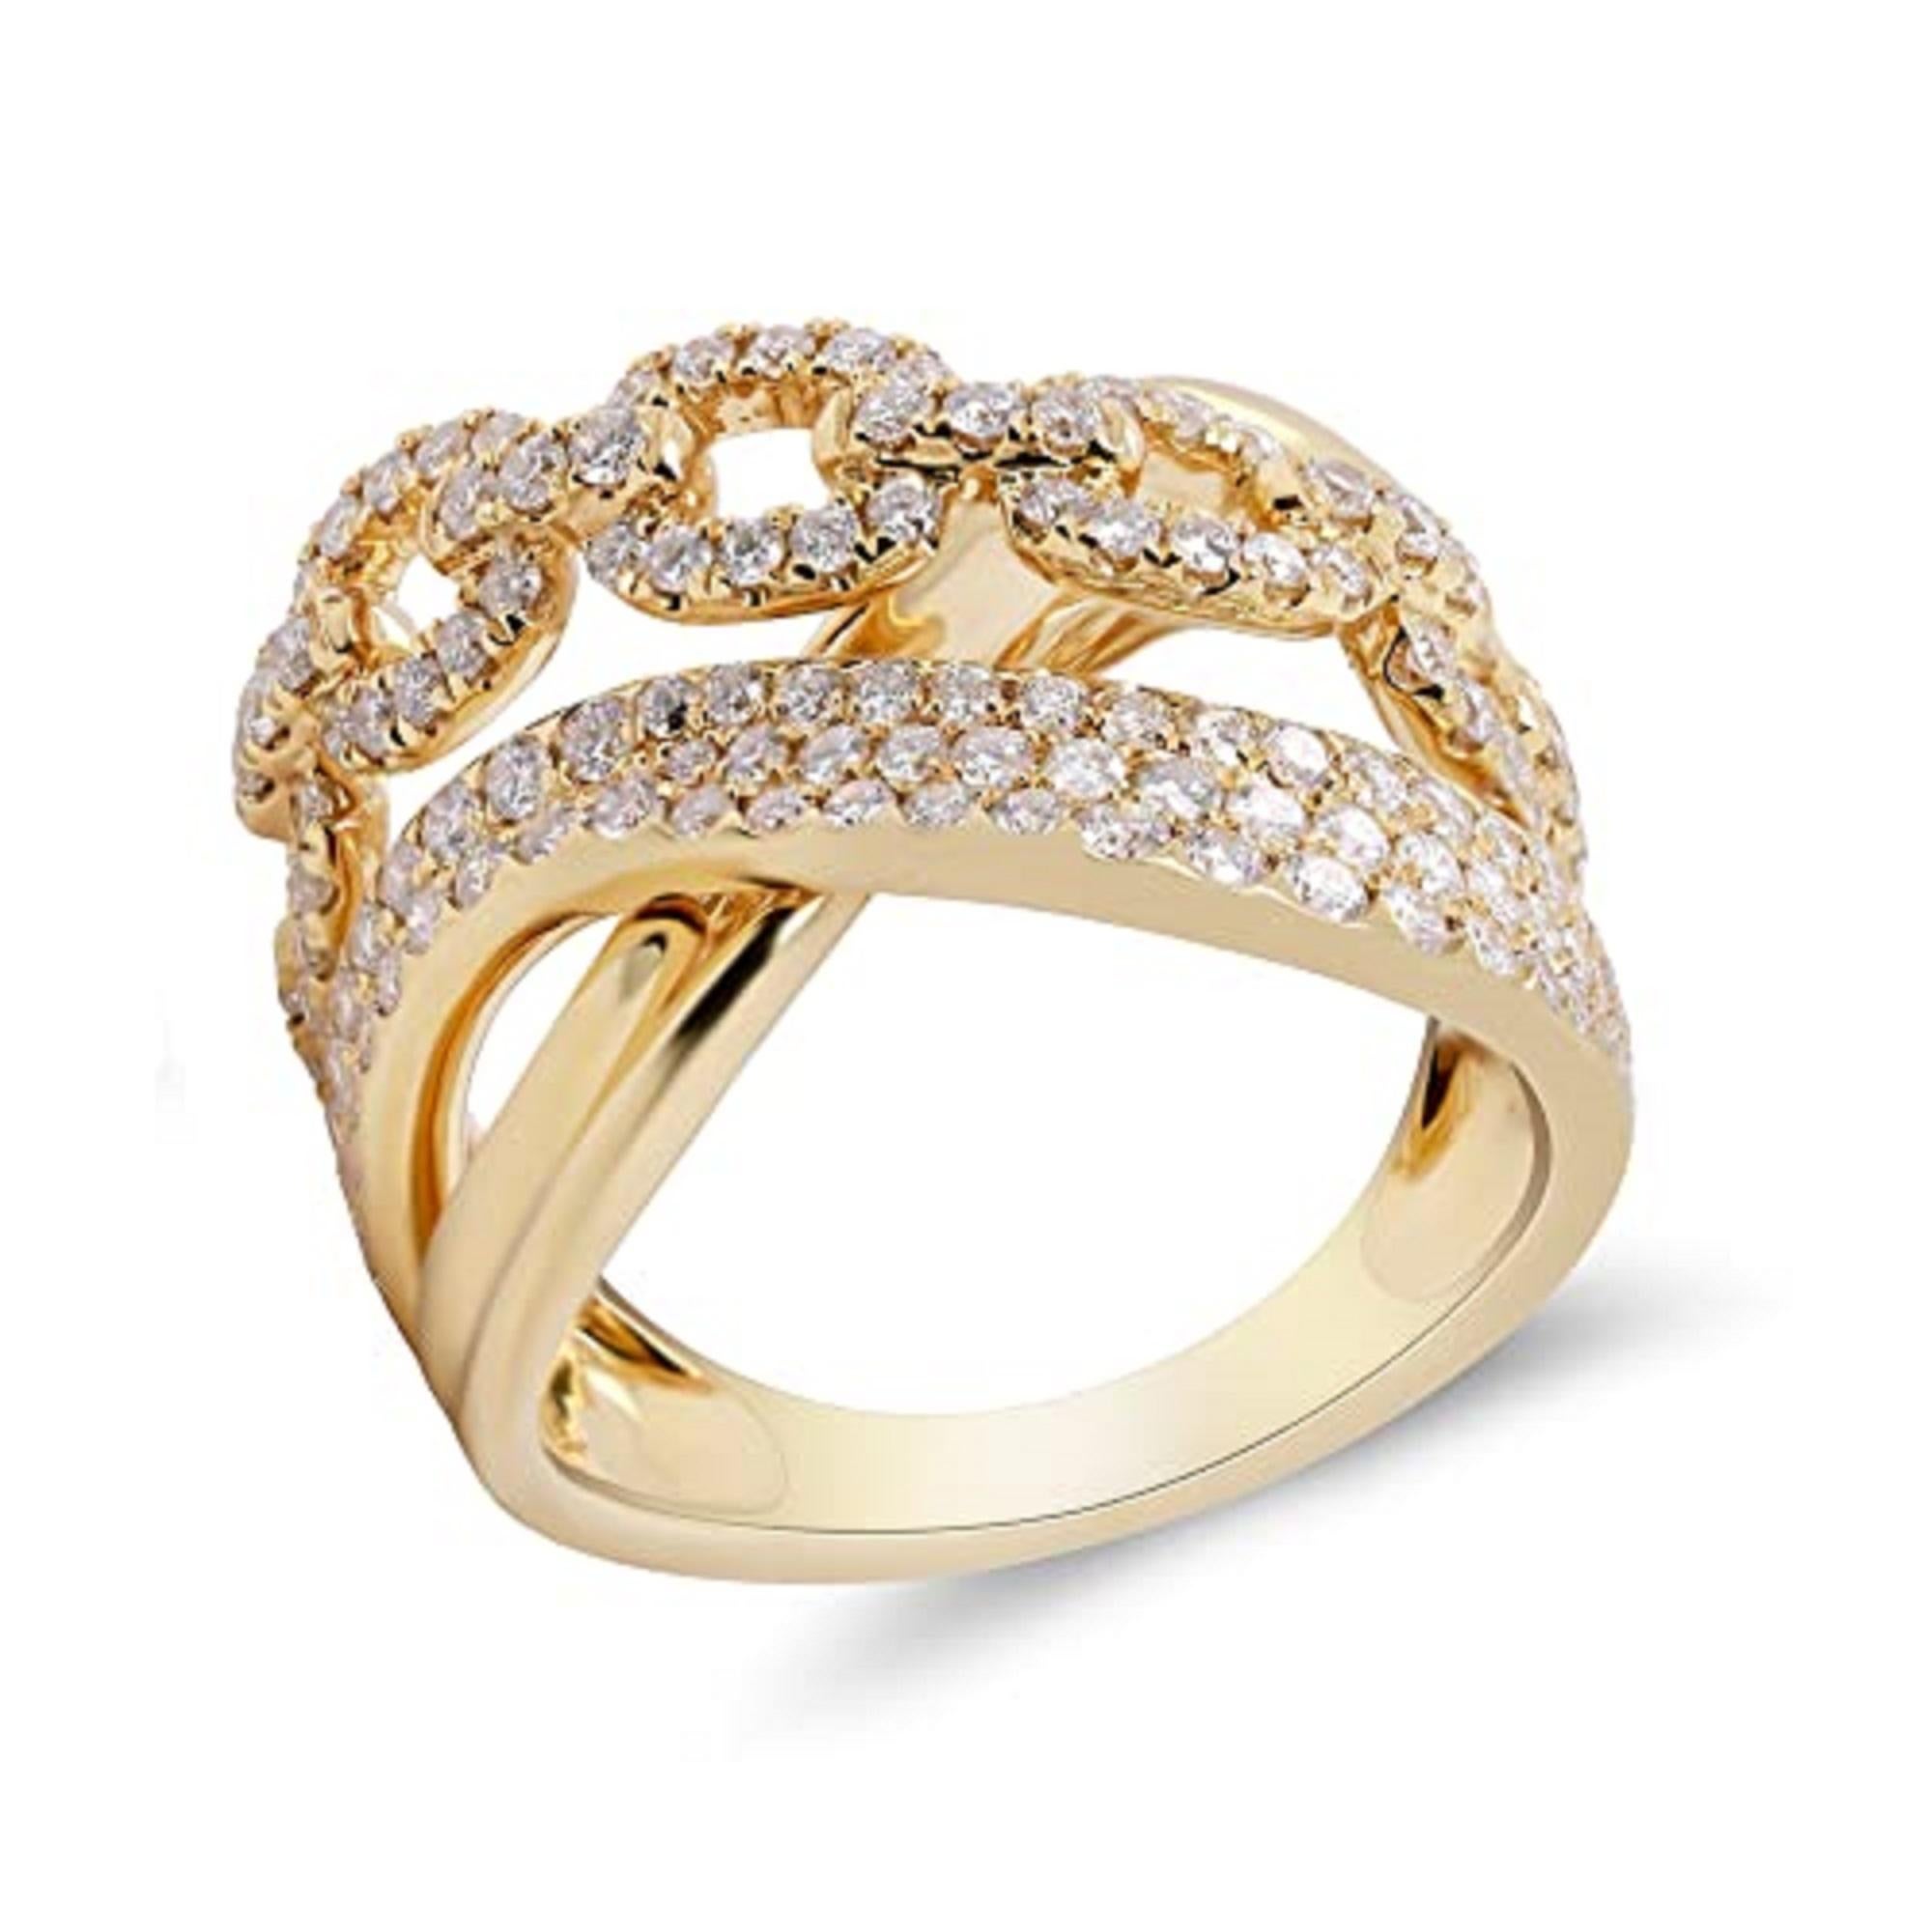 1.27 Carat Total Weight Round Diamond 18 Karat Yellow Gold Cocktail Ring In New Condition For Sale In New York, NY